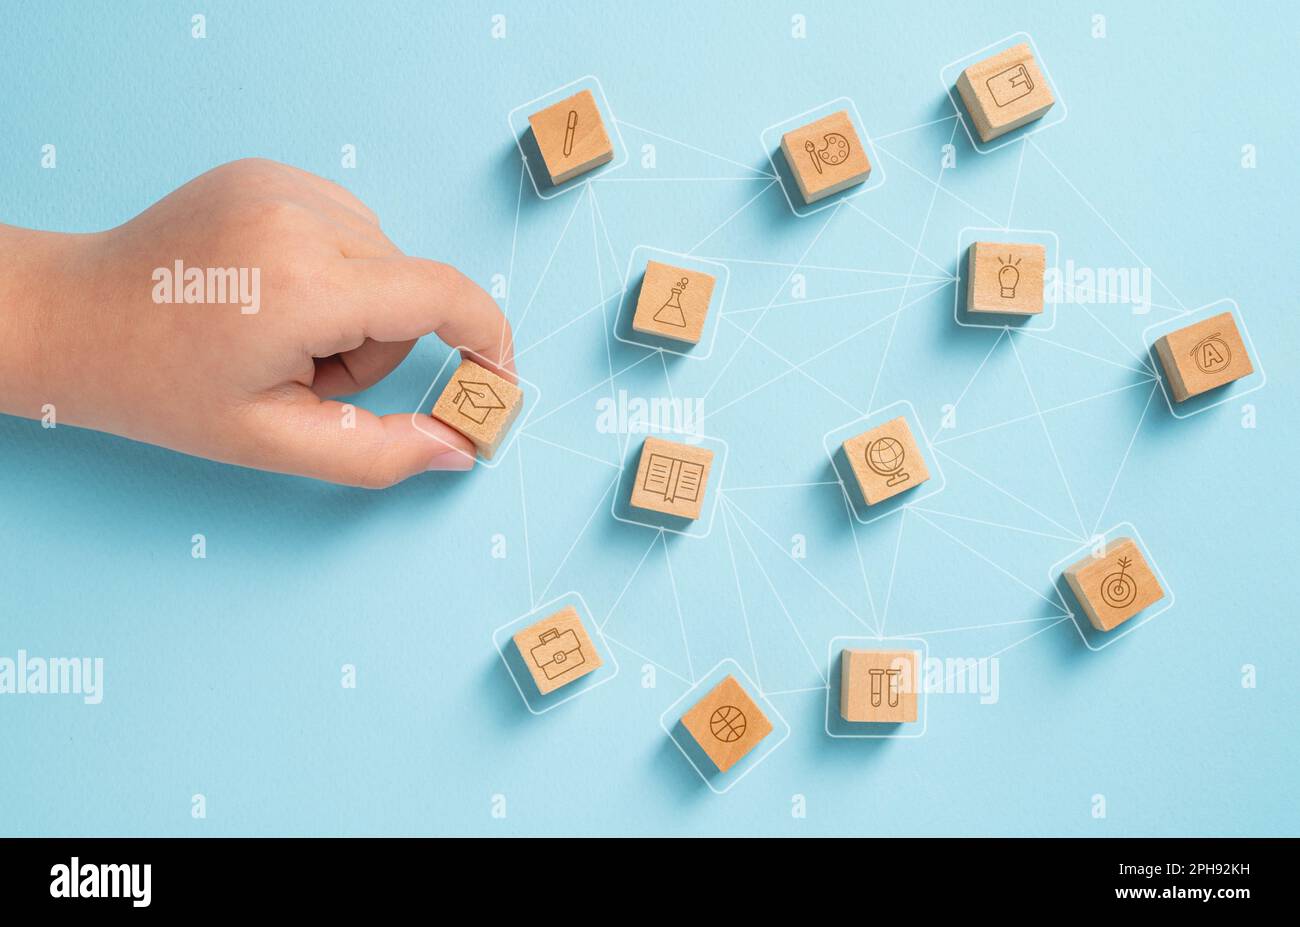 Student organizing wooden cubes with education icons. Education concept Stock Photo